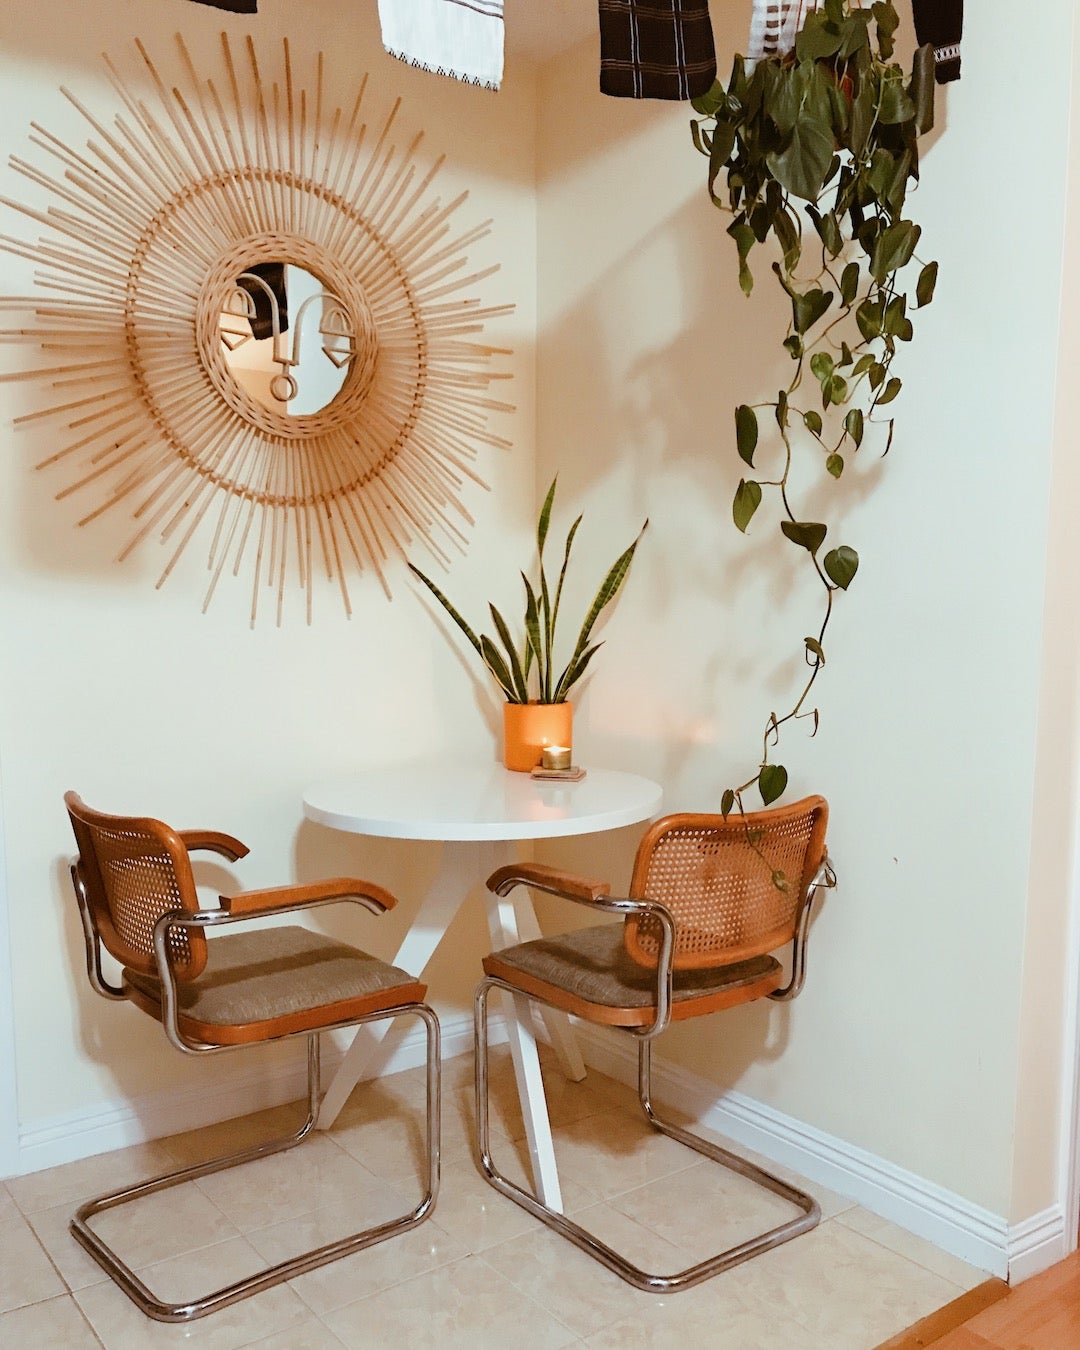 Corner table with a plant on top